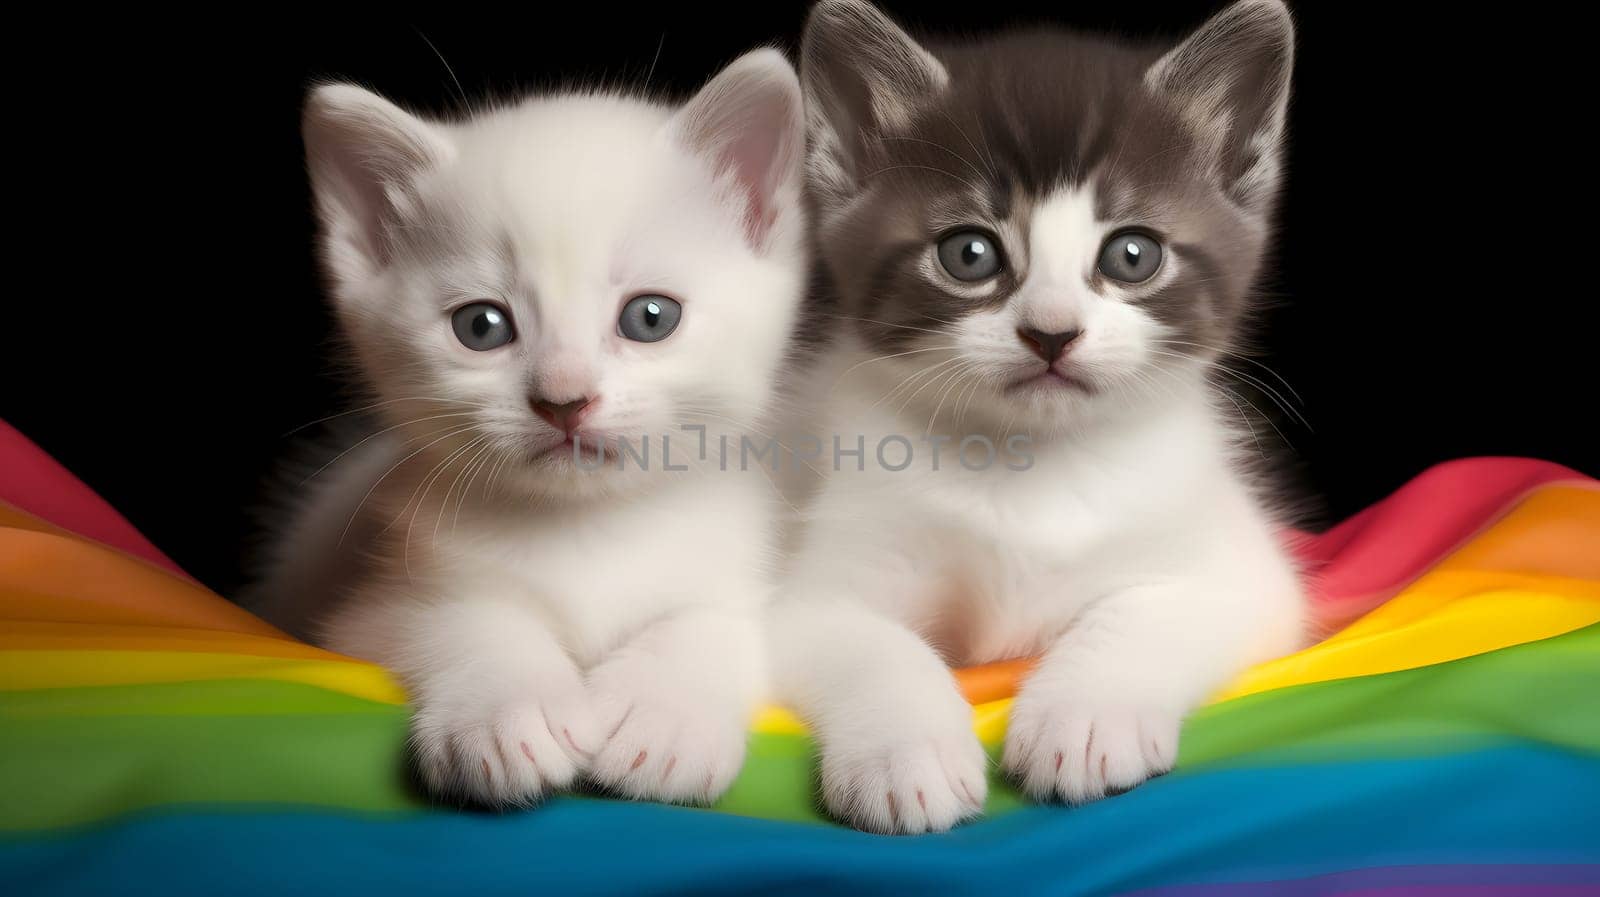 pair of kittens on rainbow LGBT flag, neural network generated image by z1b